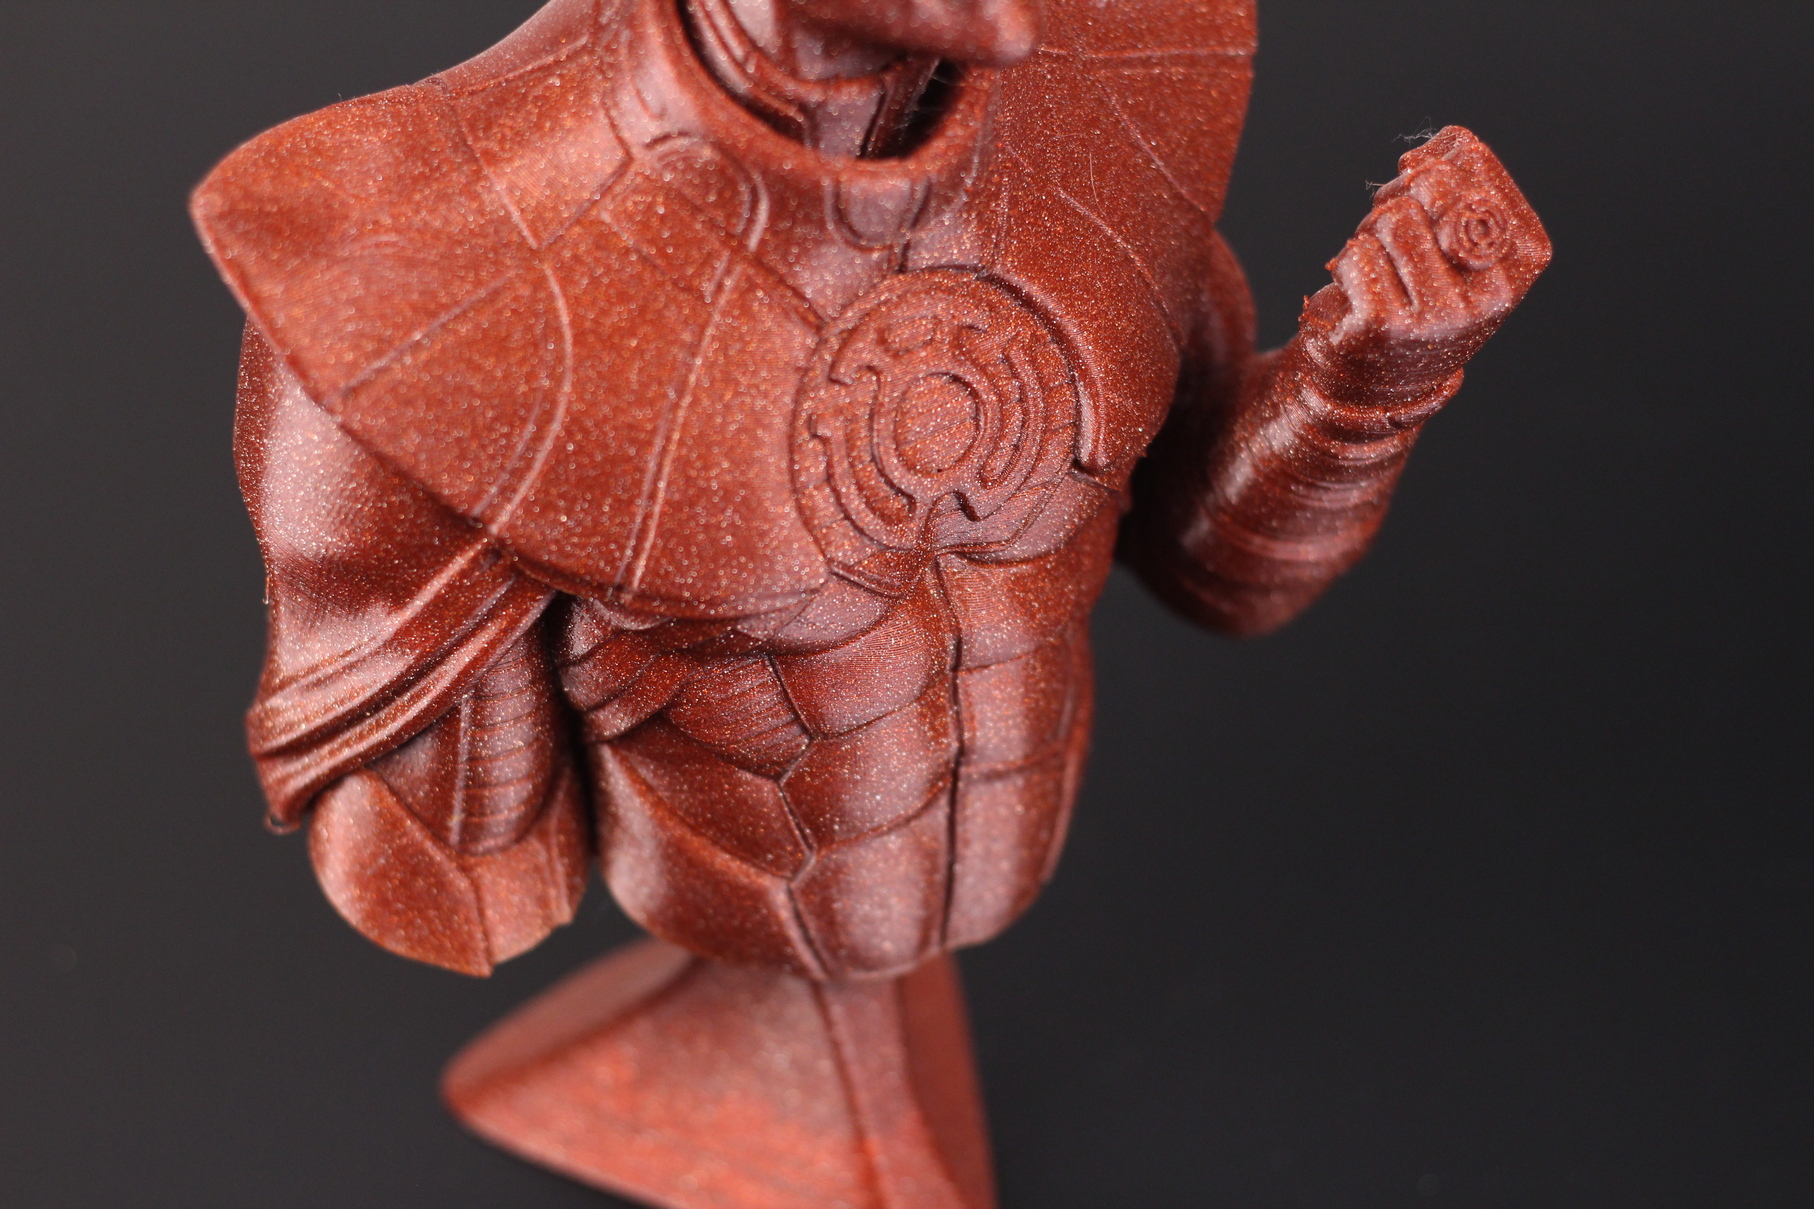 Sinestro Bust printed on the BIQU B1 SE Plus 1 | BIQU B1 SE PLUS Review: SKR 2 and ABL from Factory